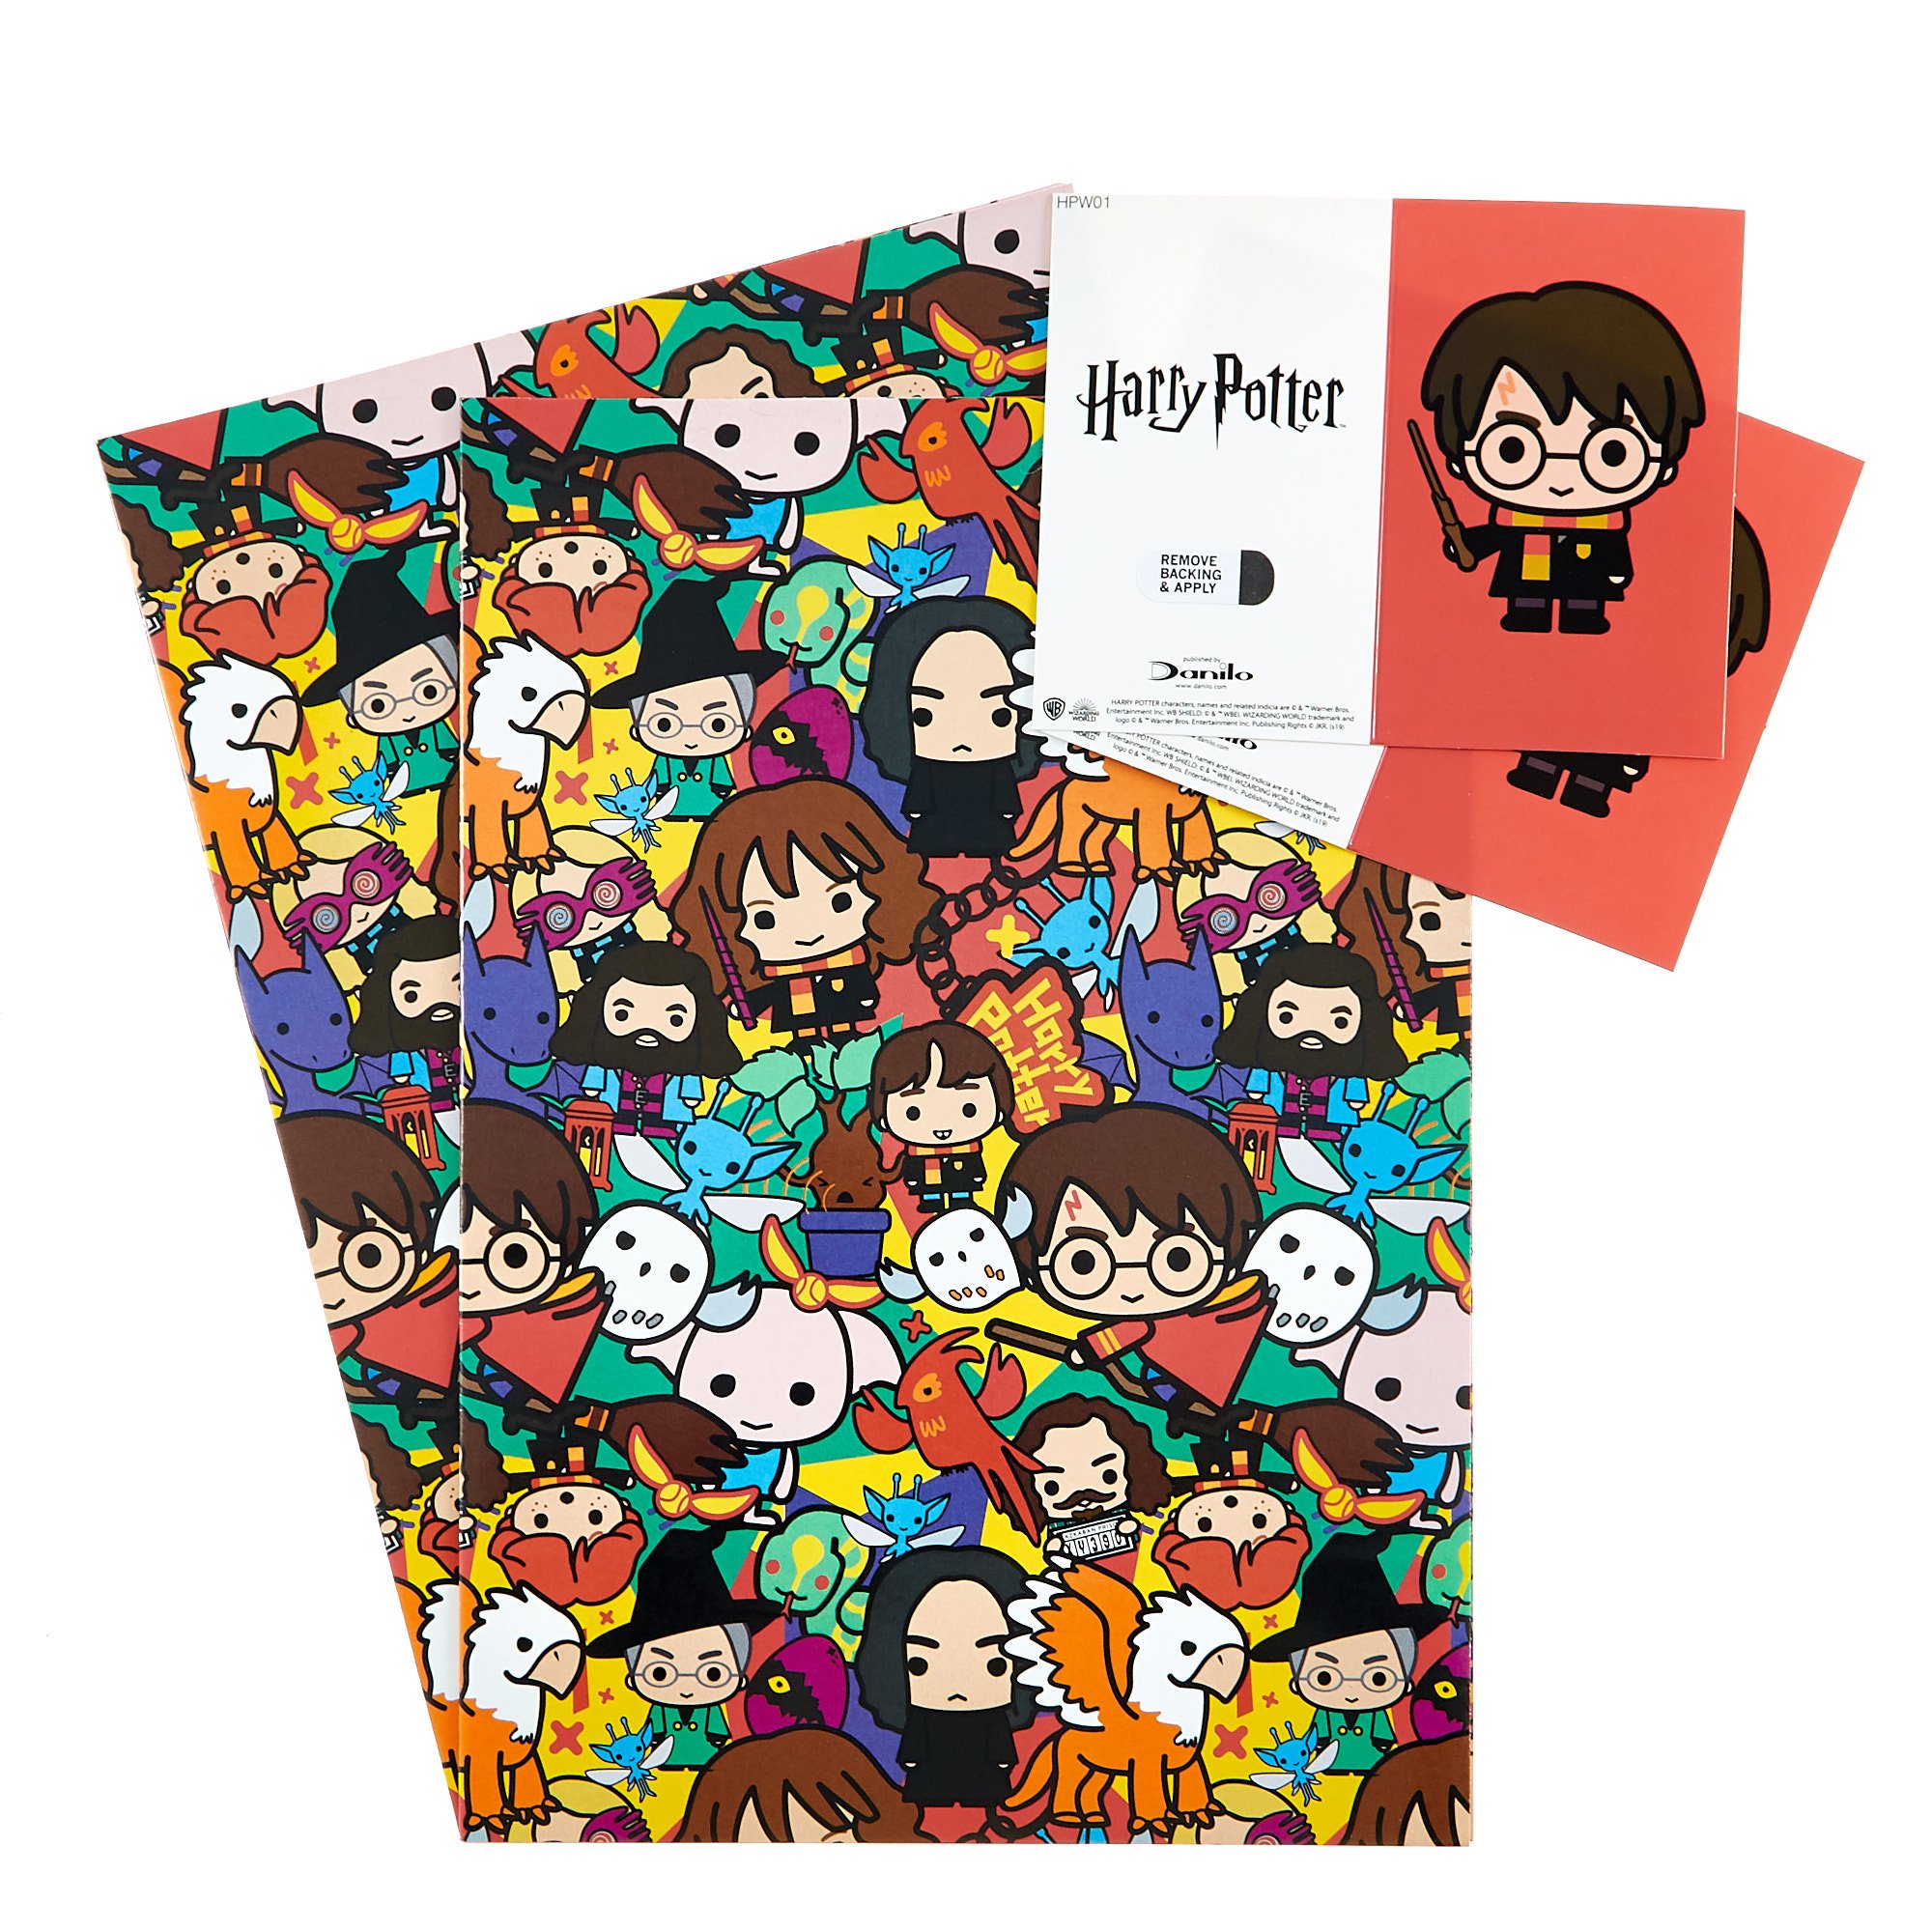 Harry Potter Wrapping Paper & Gift Tags - Pack of 2